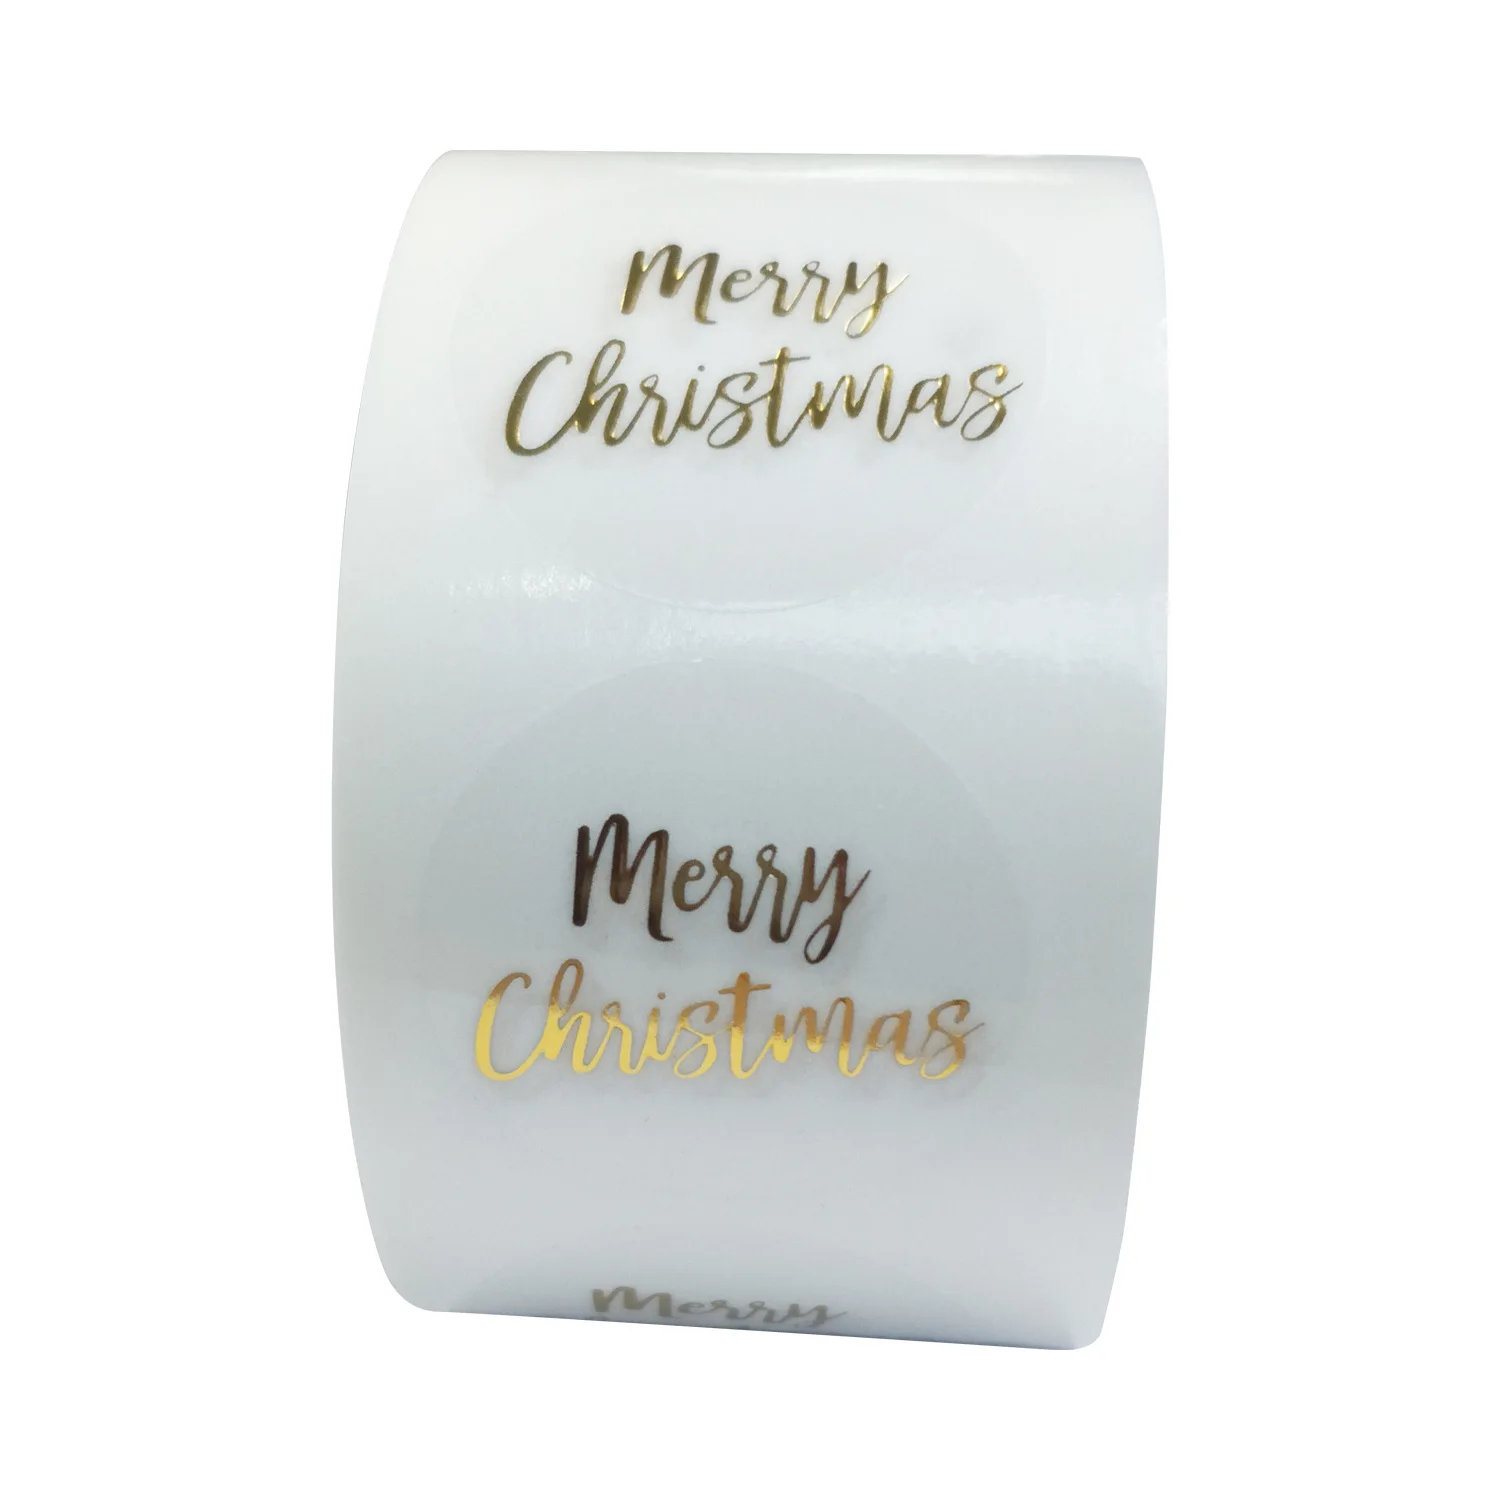 100 500pcs Round Clear Merry Christmas Stickers Thank You Card Box Package Label Sealing Stickers Wedding Decor Stationery